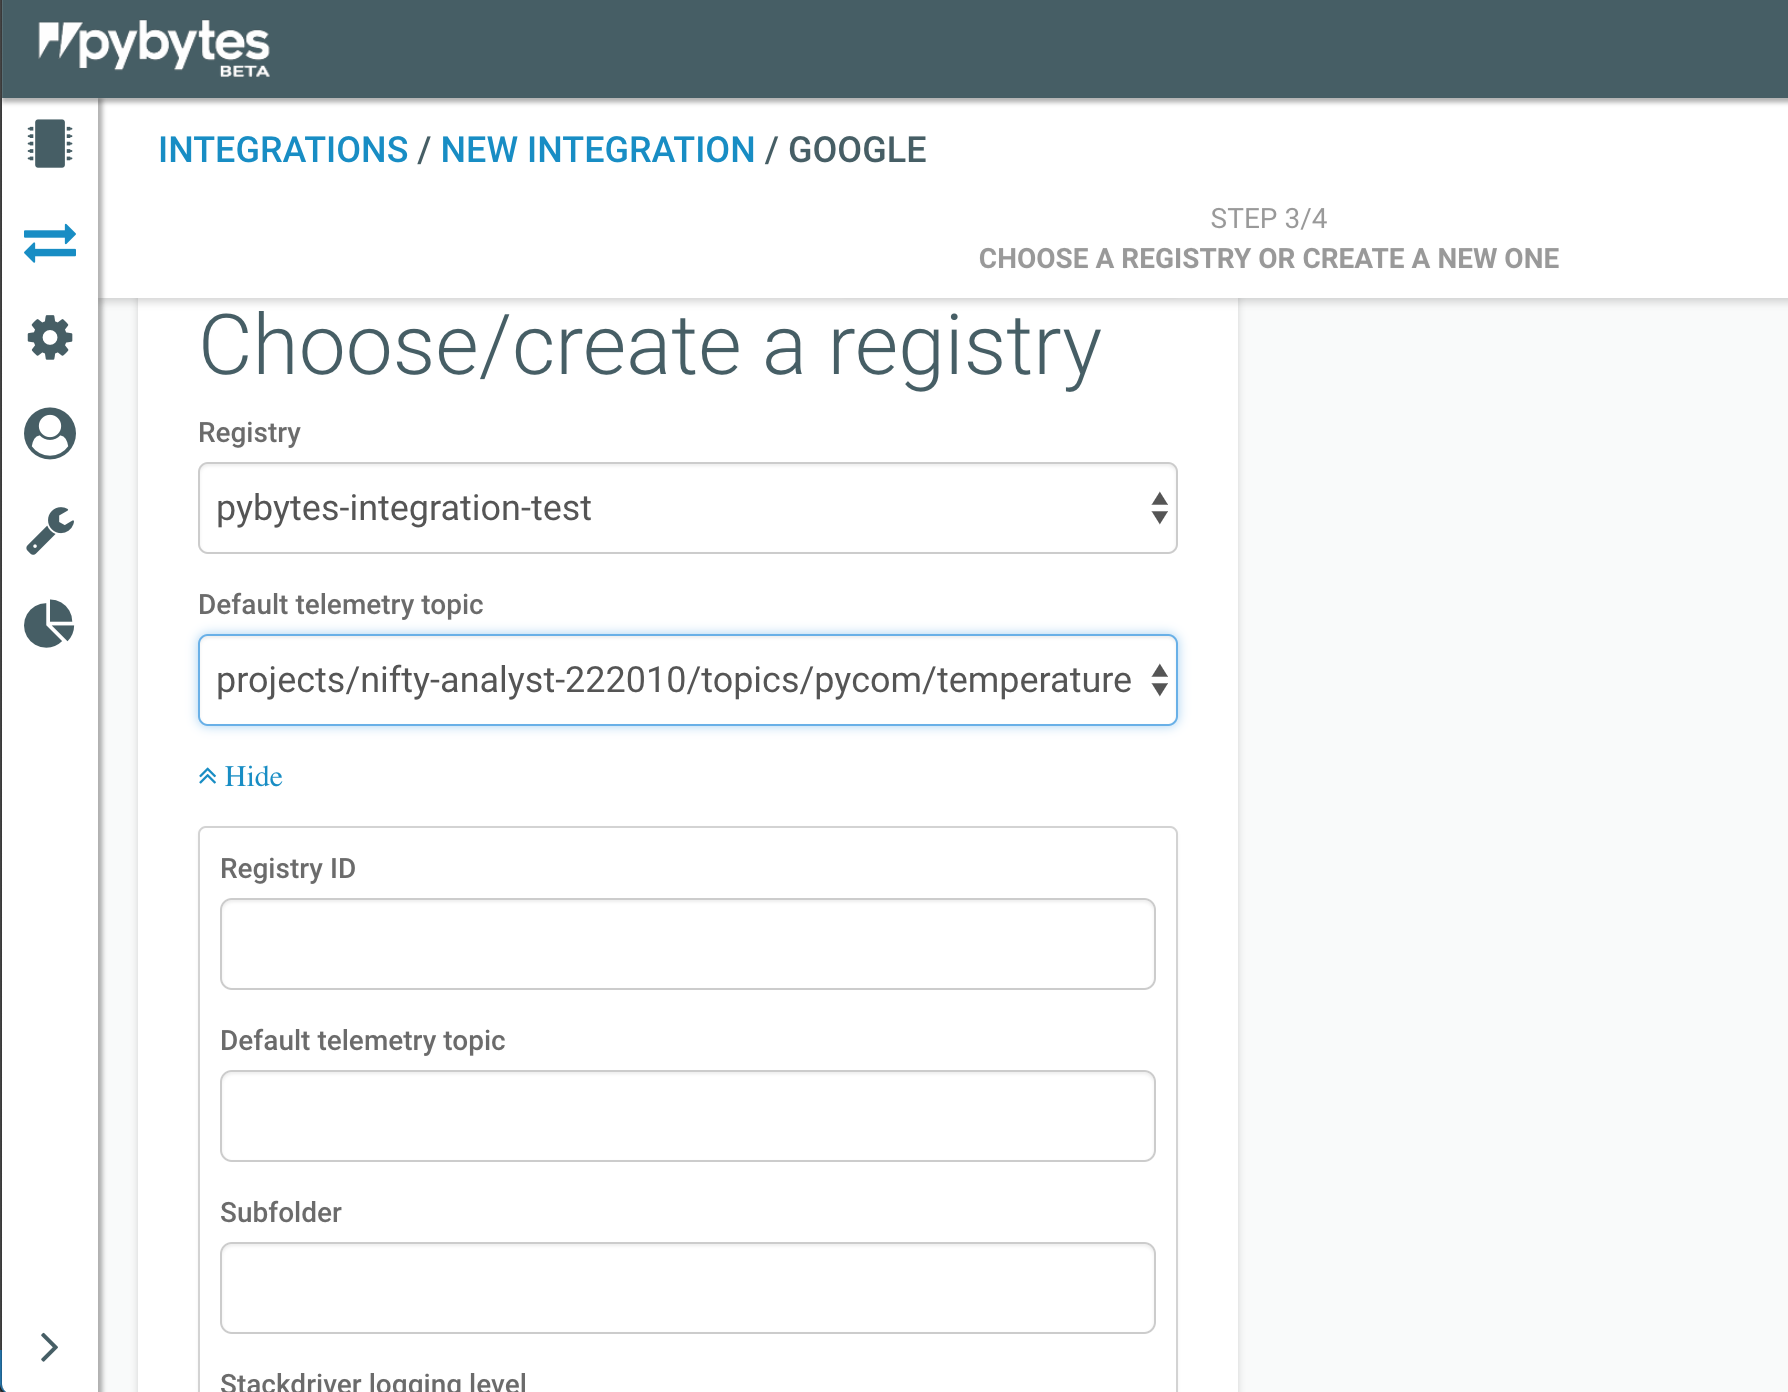 Step 2: registry and topic